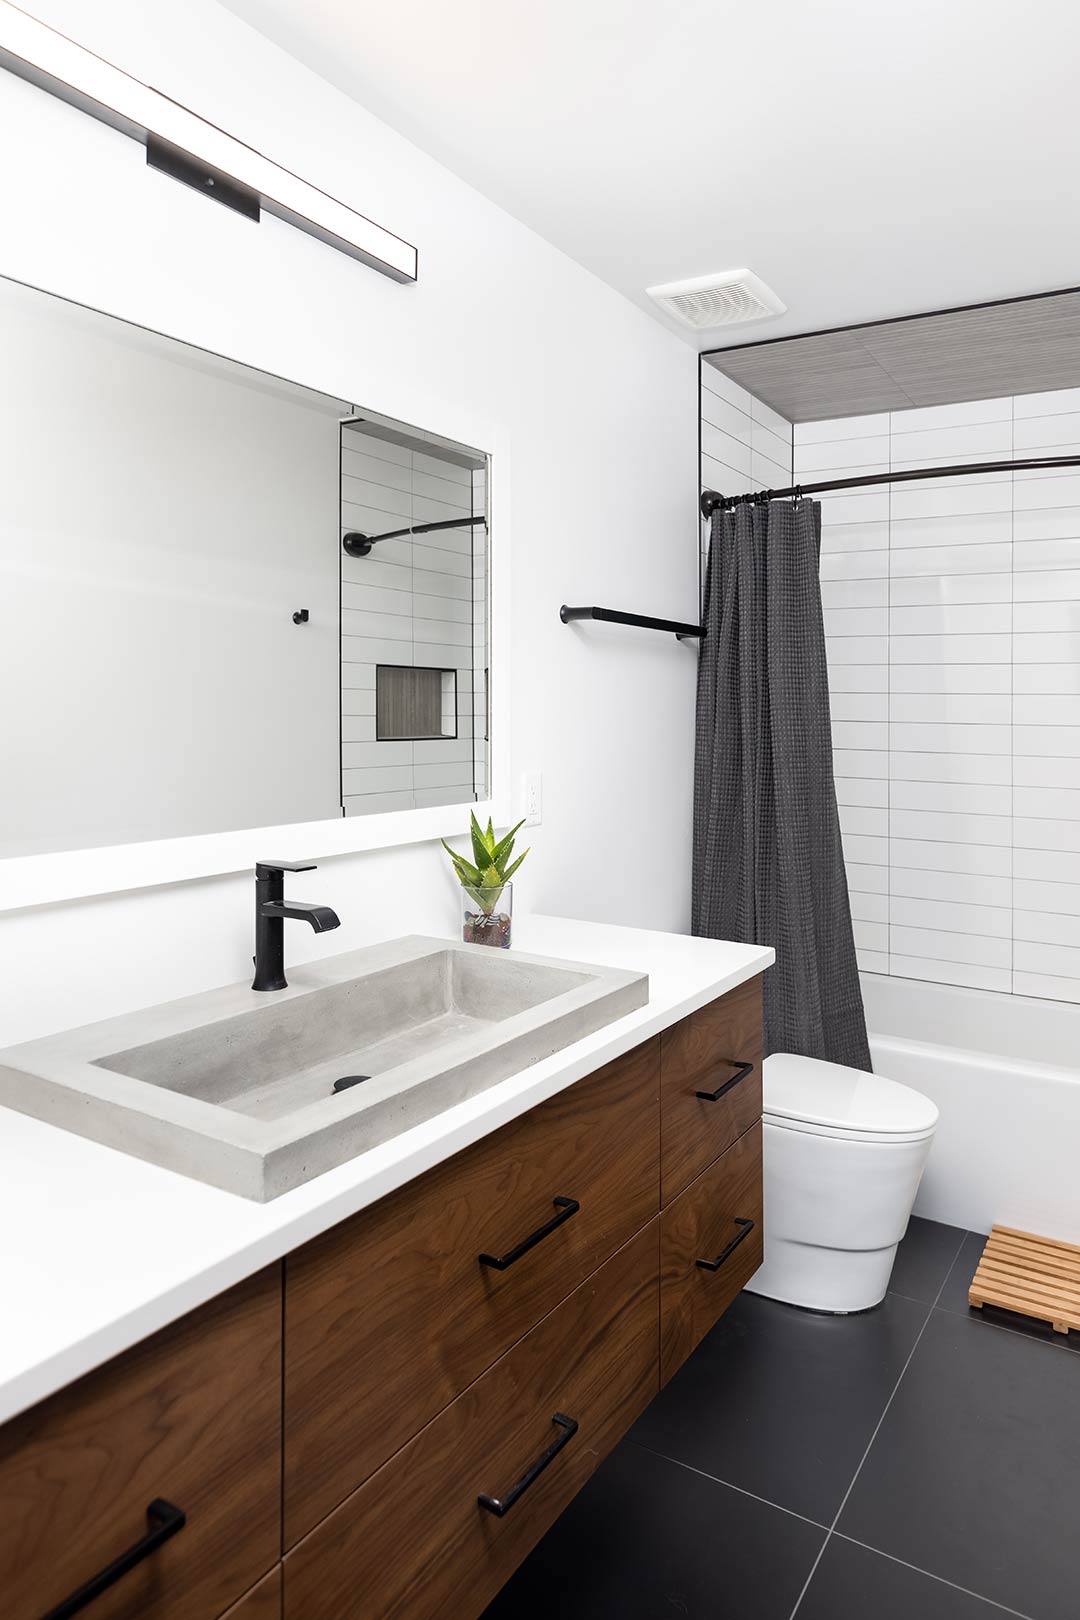 The upstairs hallway bath of this mid-century modern remodel features a custom vanity and concrete-look sink that ties into the rest of the aesthetic pulled together by Freestone Design-Build